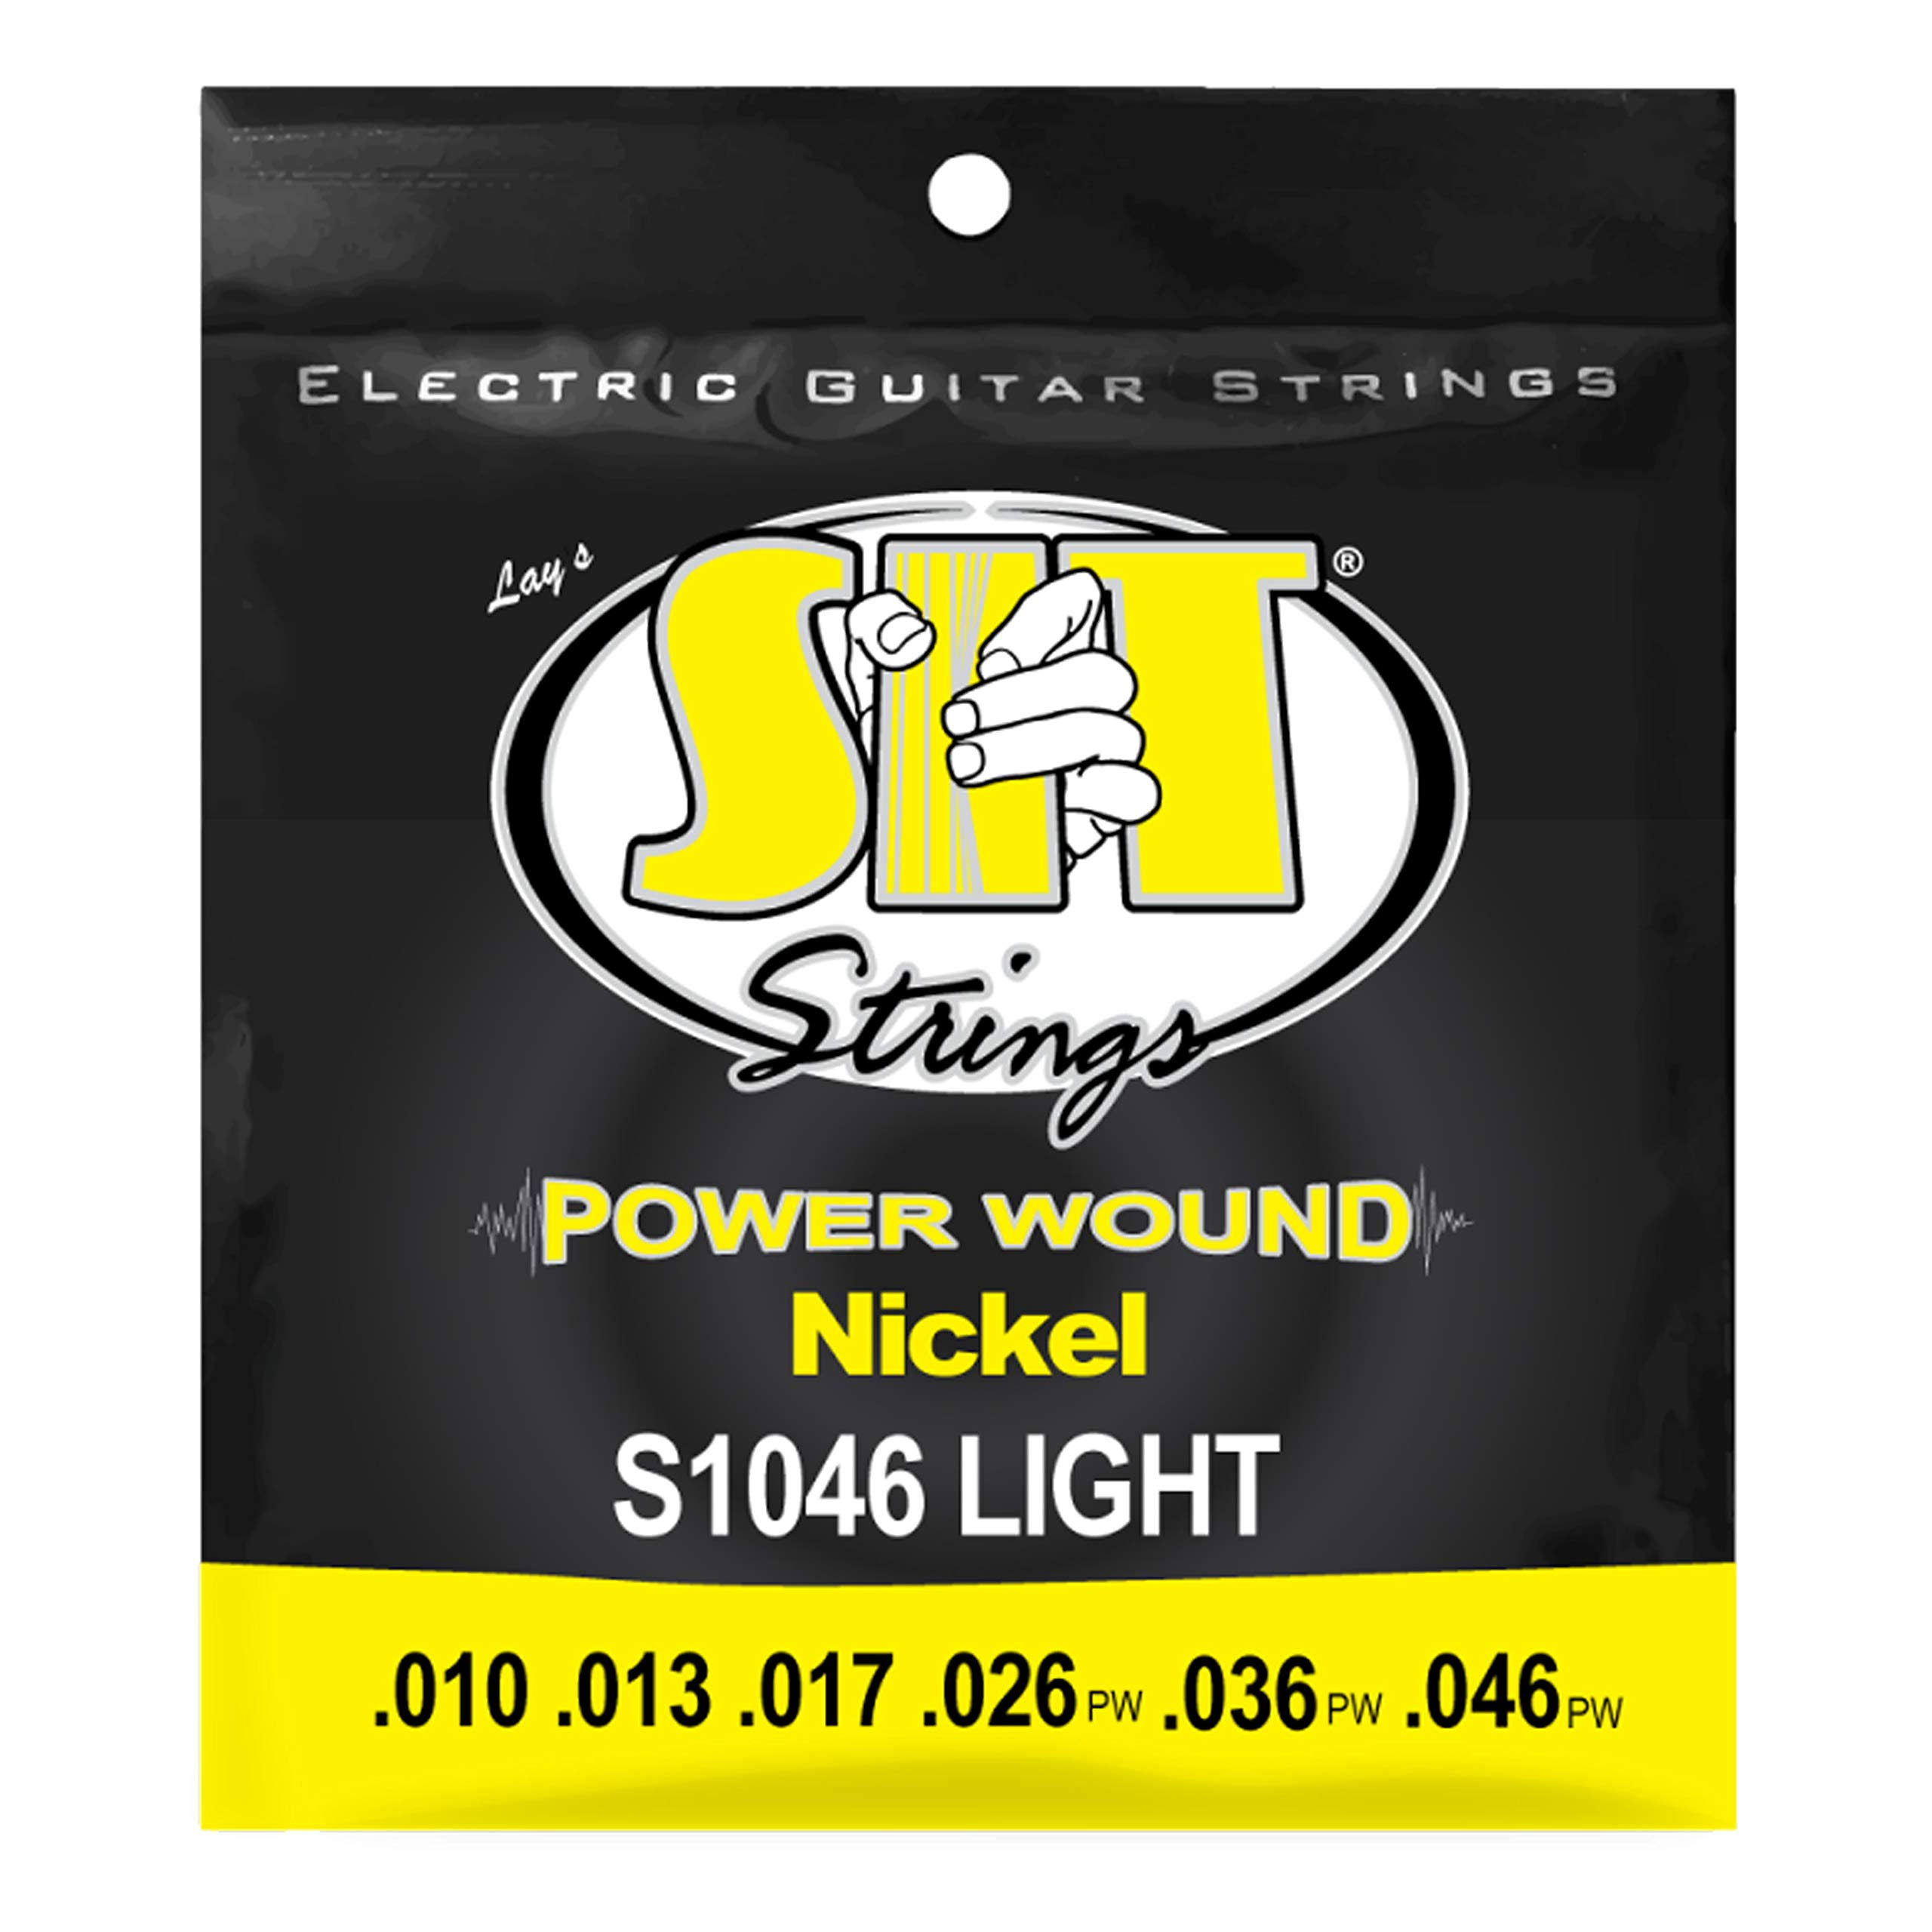 Sit Power Wound Electric Guitar Strings - S1046 Light